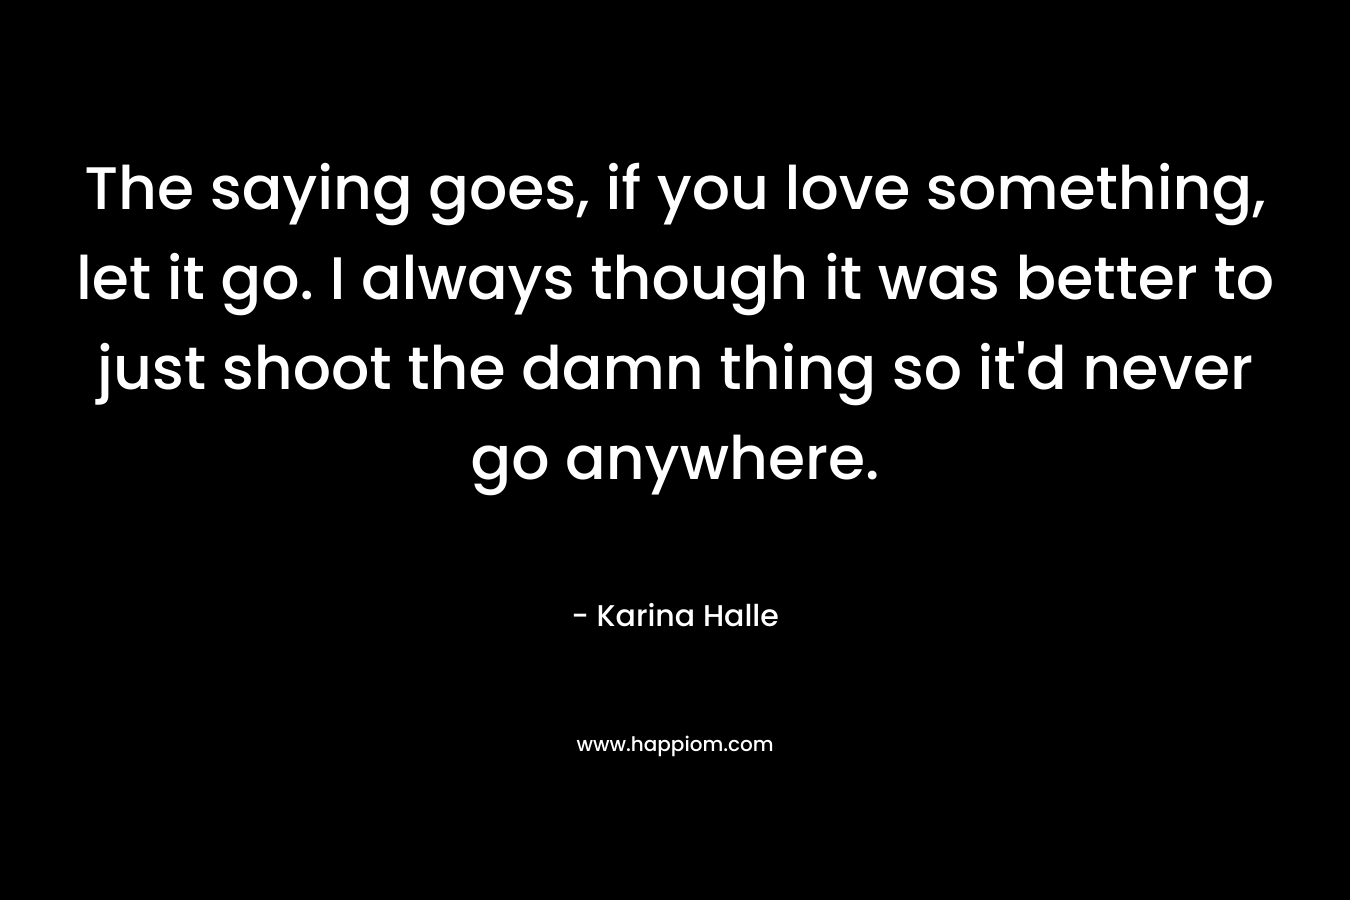 The saying goes, if you love something, let it go. I always though it was better to just shoot the damn thing so it’d never go anywhere. – Karina Halle